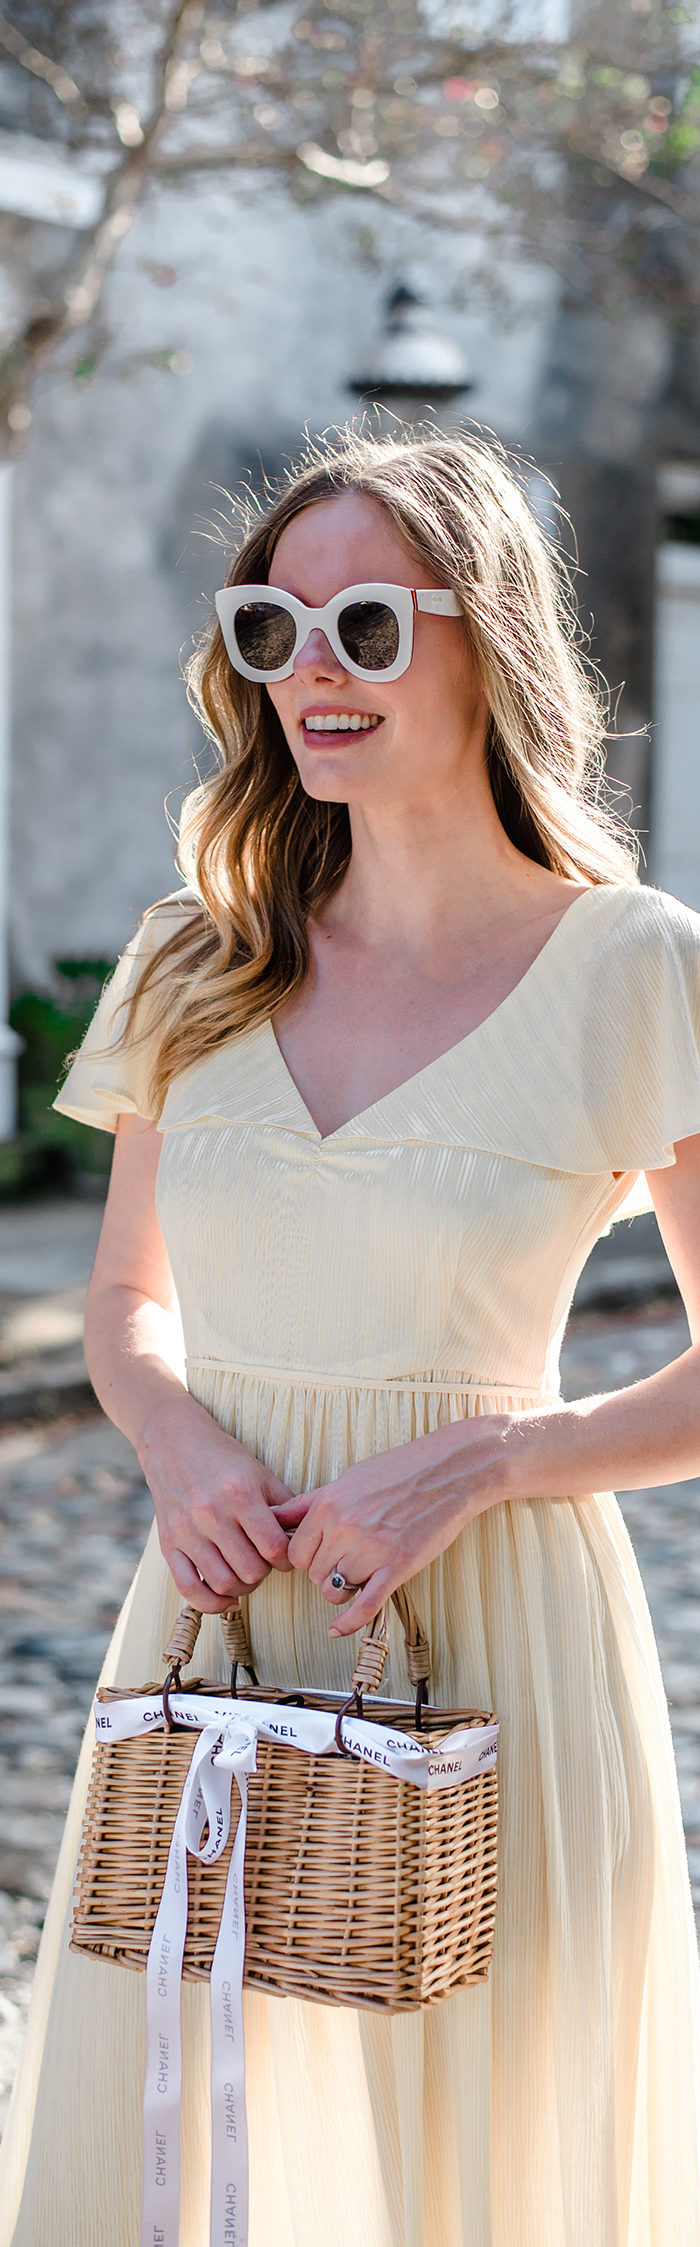 Alyssa Campanella of The A List blog's 48 Hours in Charleston itinerary wearing Christy Dawn Monarch dress in yellow